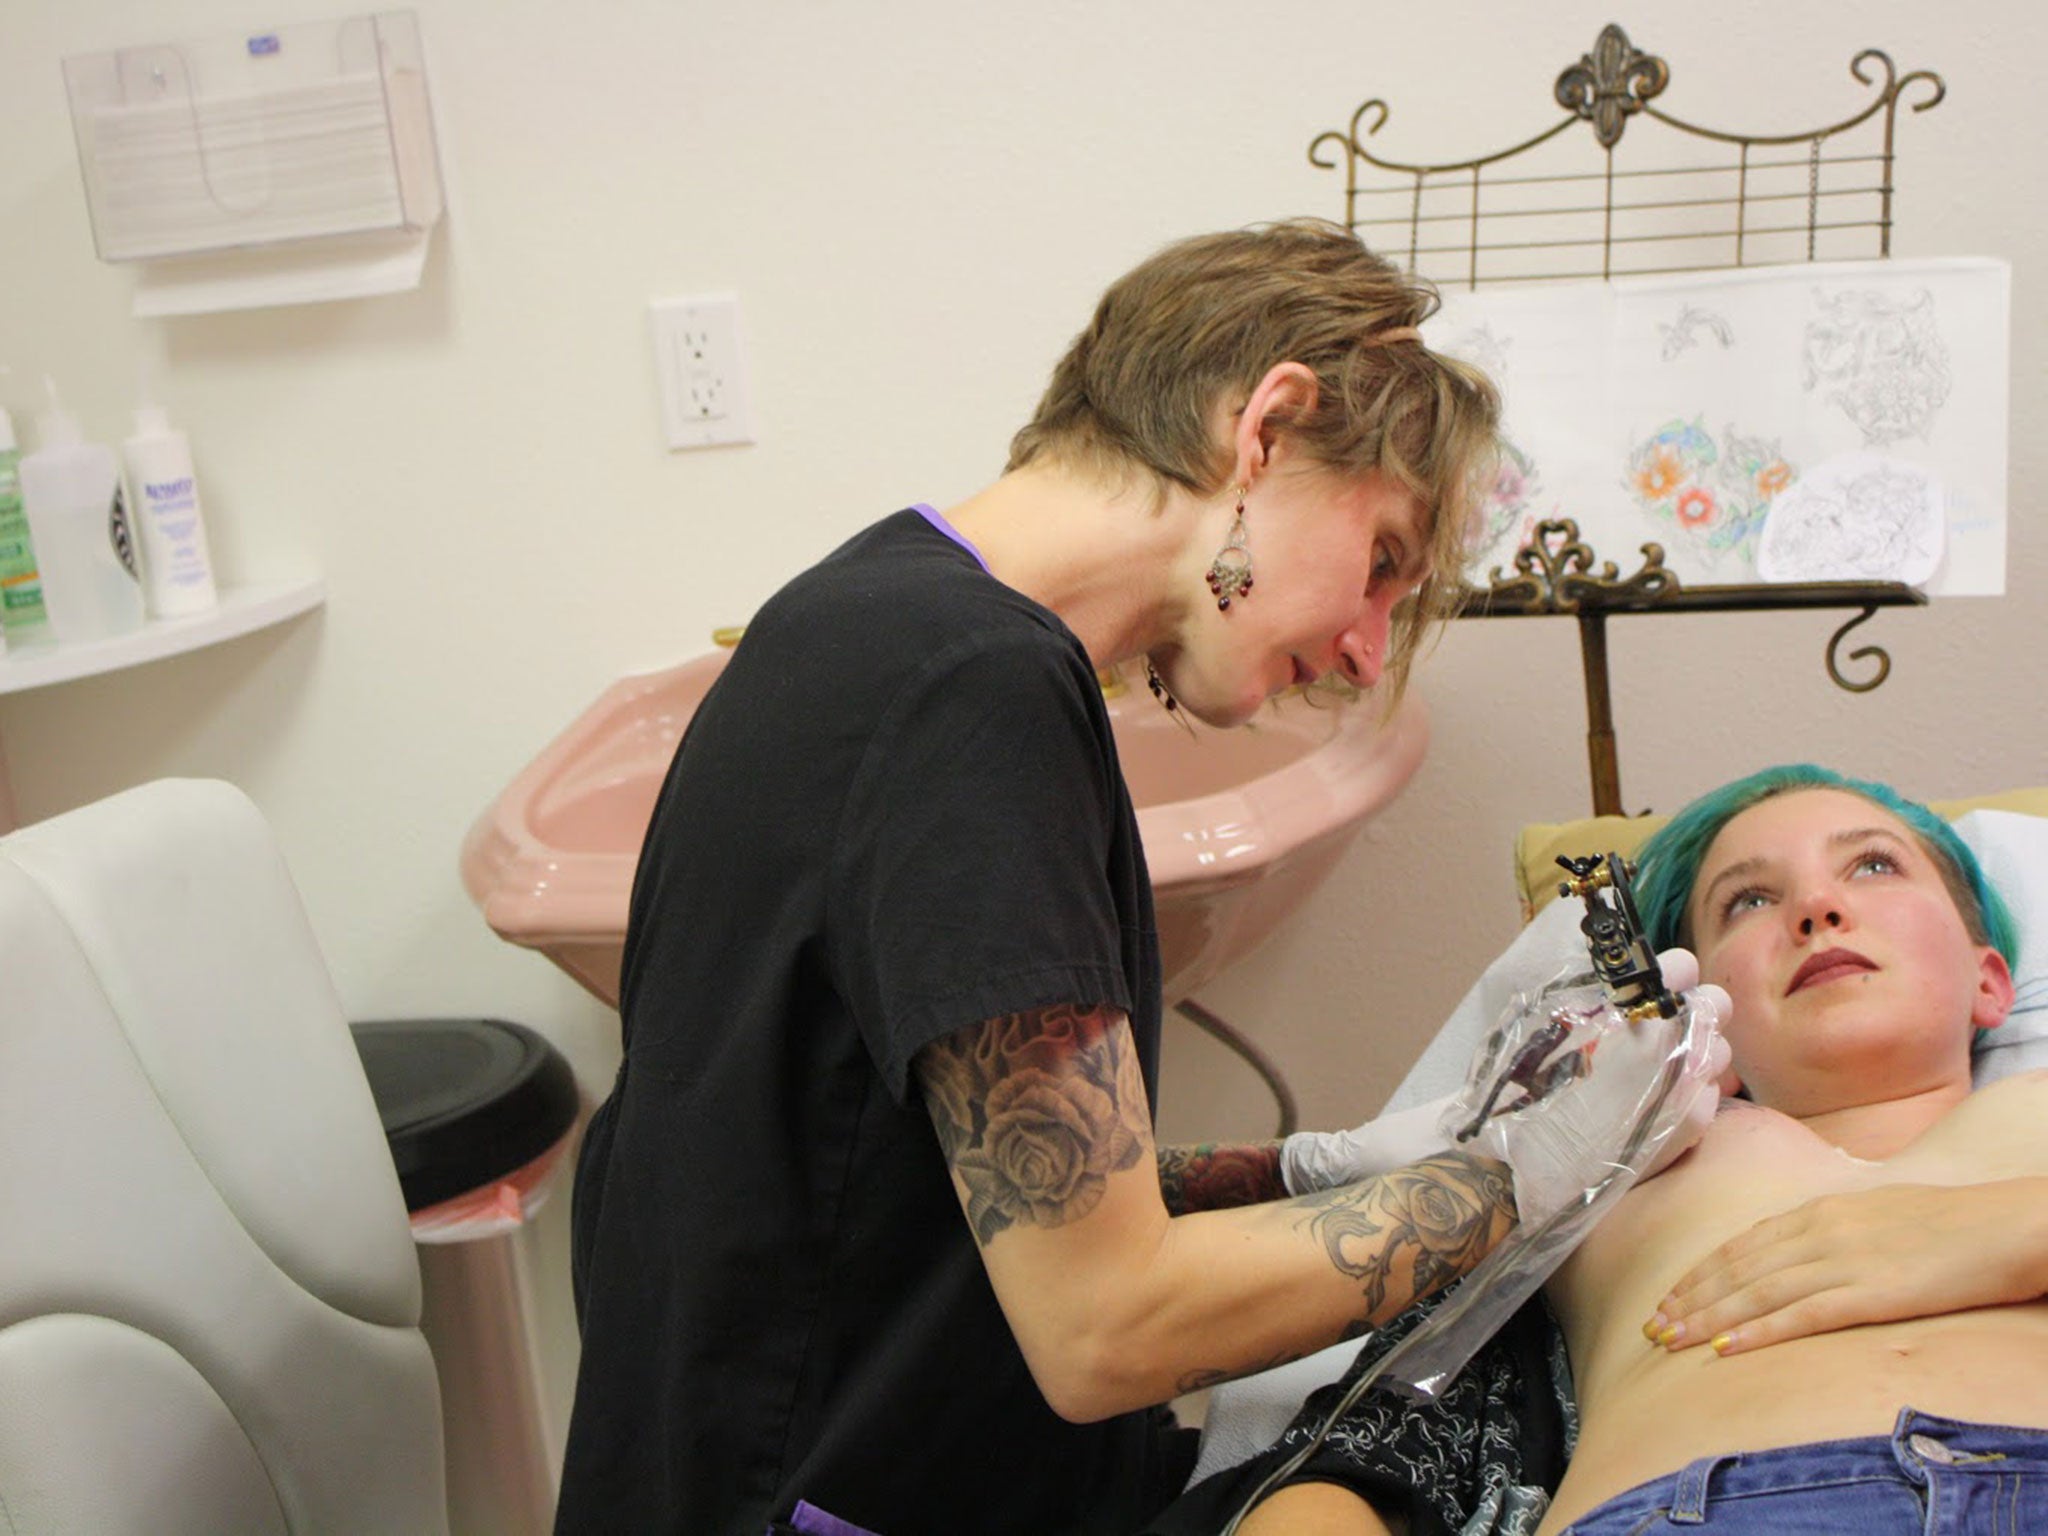 Nikki being tattooed at The Gilded Lily Design